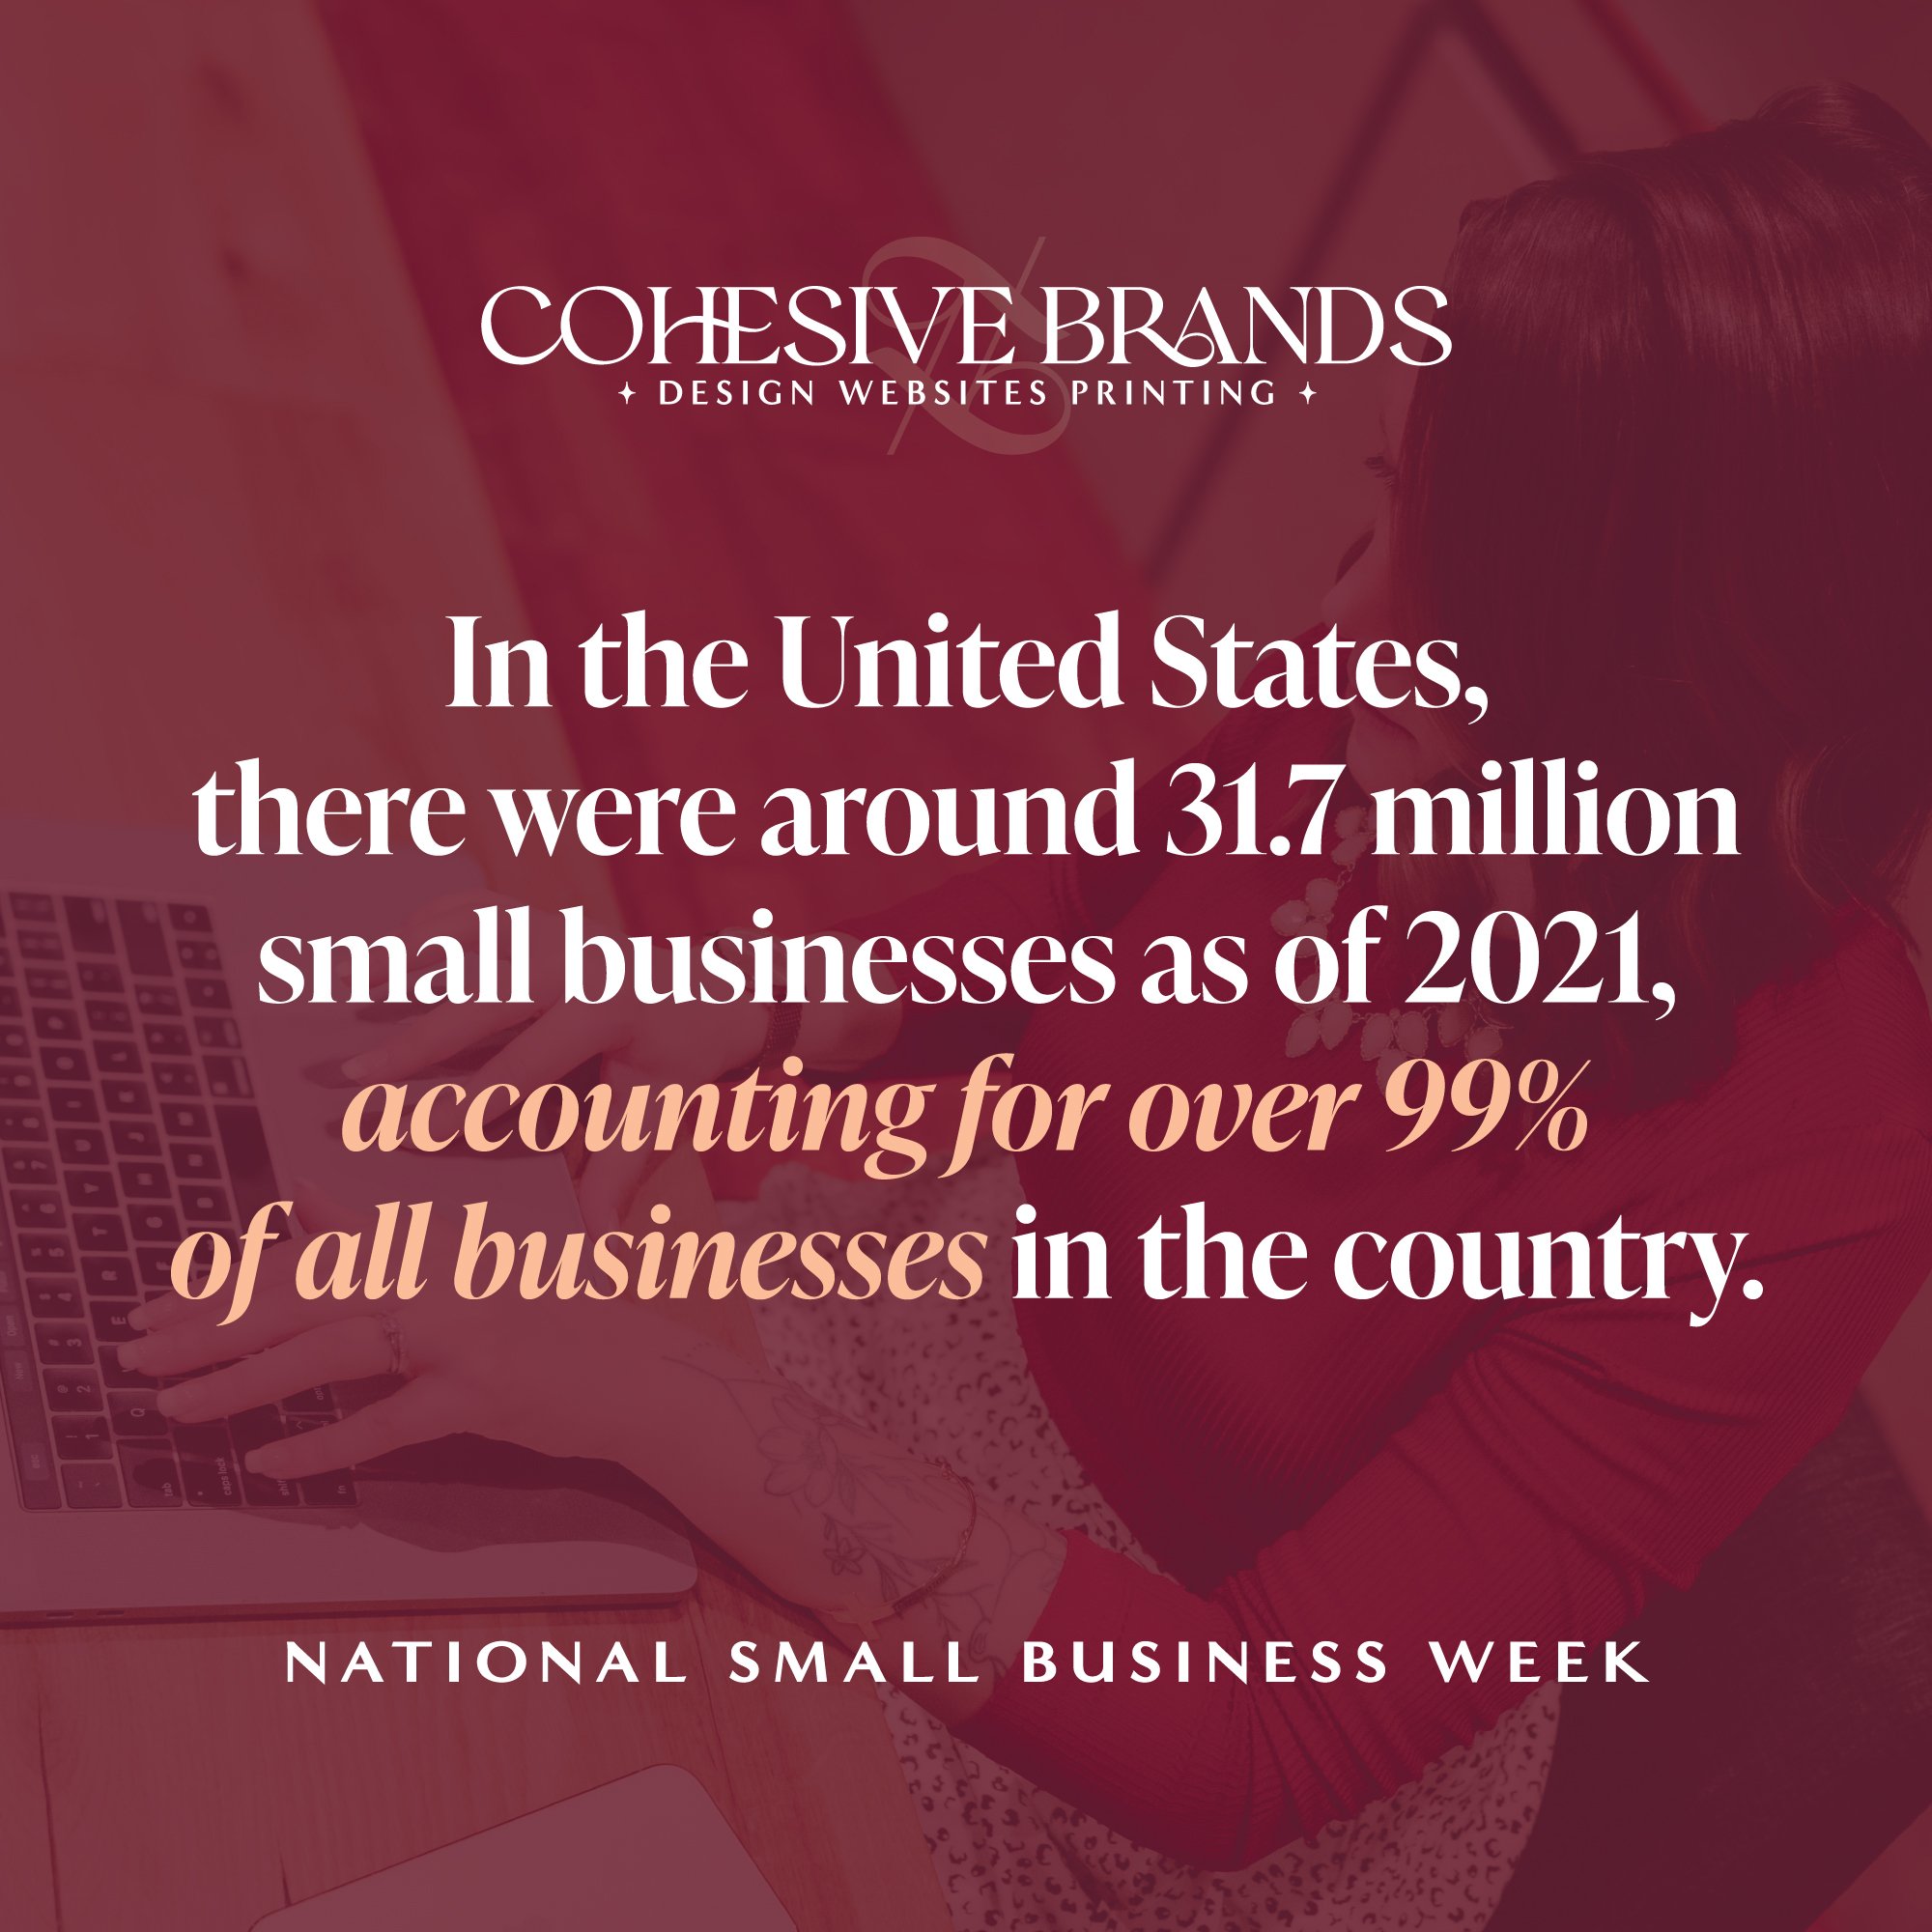 &quot;Success is not final, failure is not fatal: It is the courage to continue that counts.&quot; - Winston Churchill

We need your small business! Keep going ✨🔥🖤 Happy National Small Business 🥳

#smallbusiness #SmallBusinessOwners #EntrepreneurL